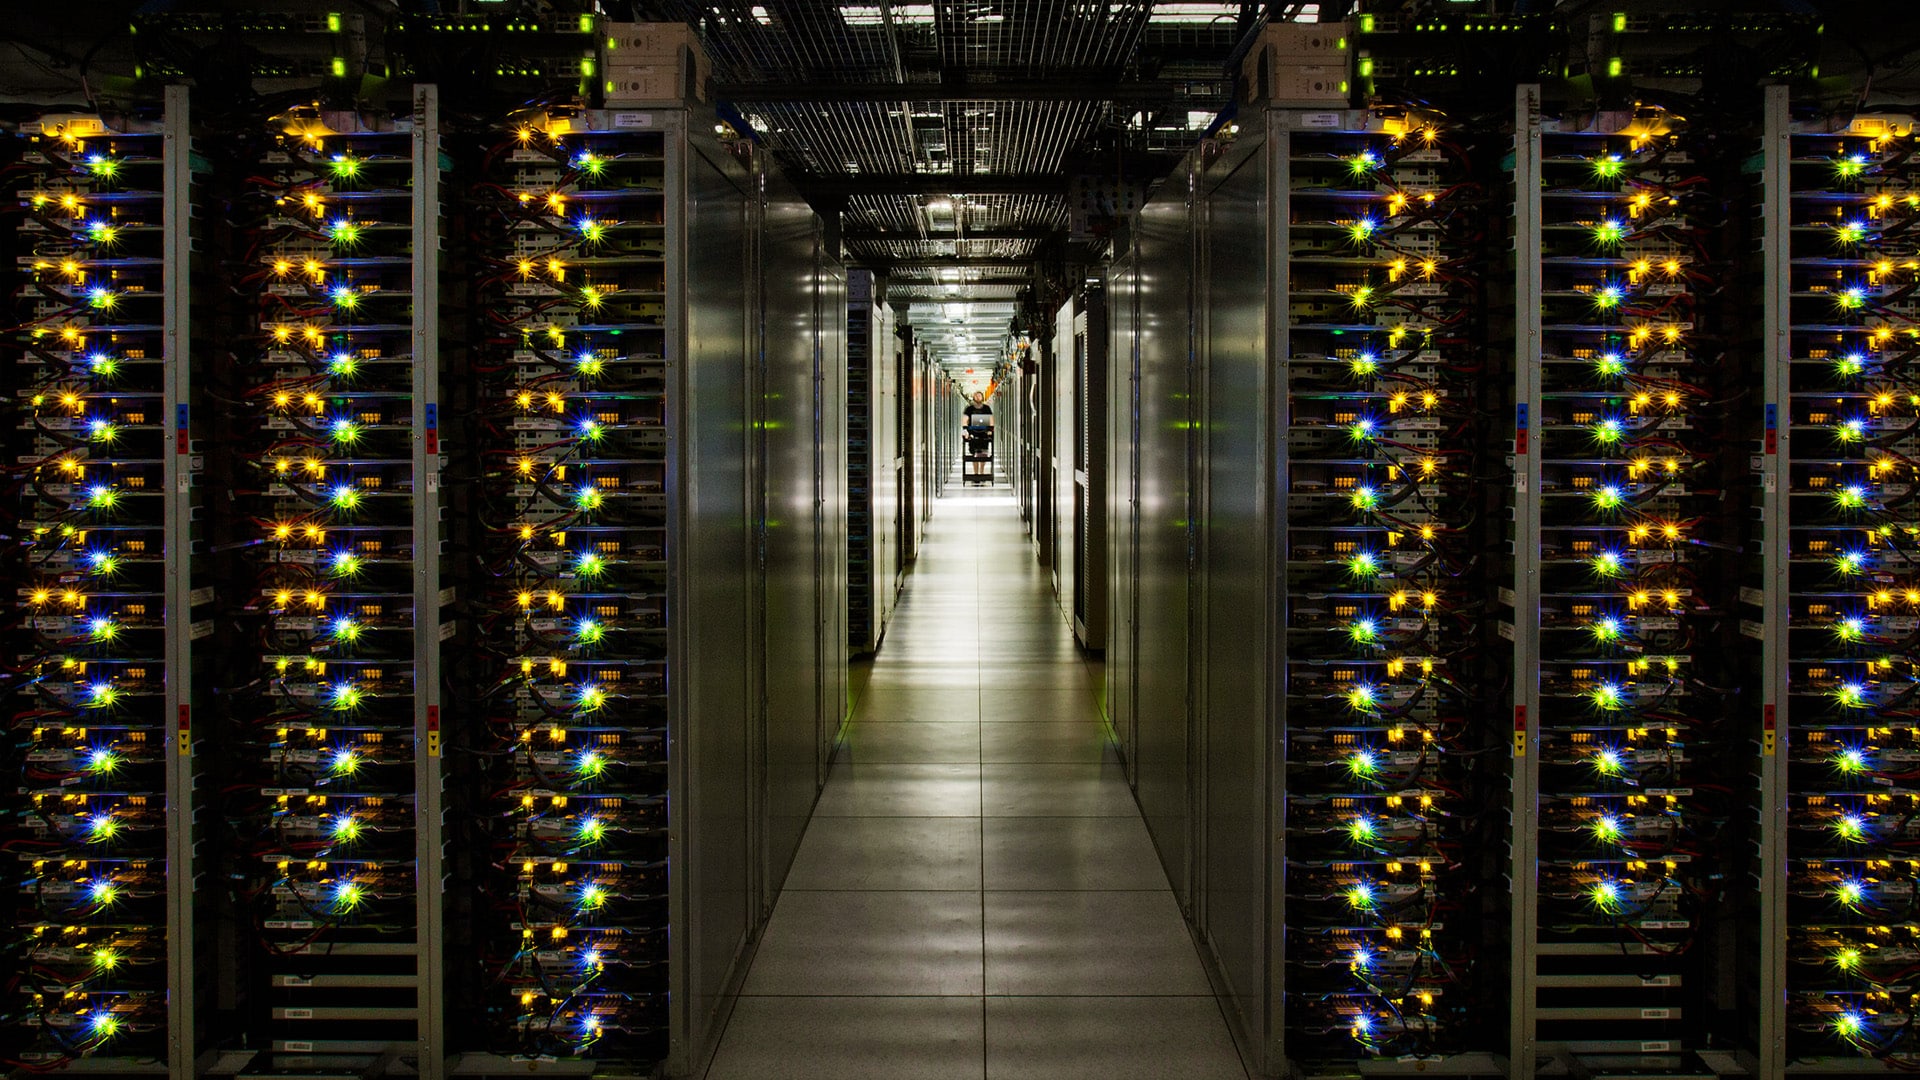 Significant controls to govt under data protection bill to hit investments in data centres